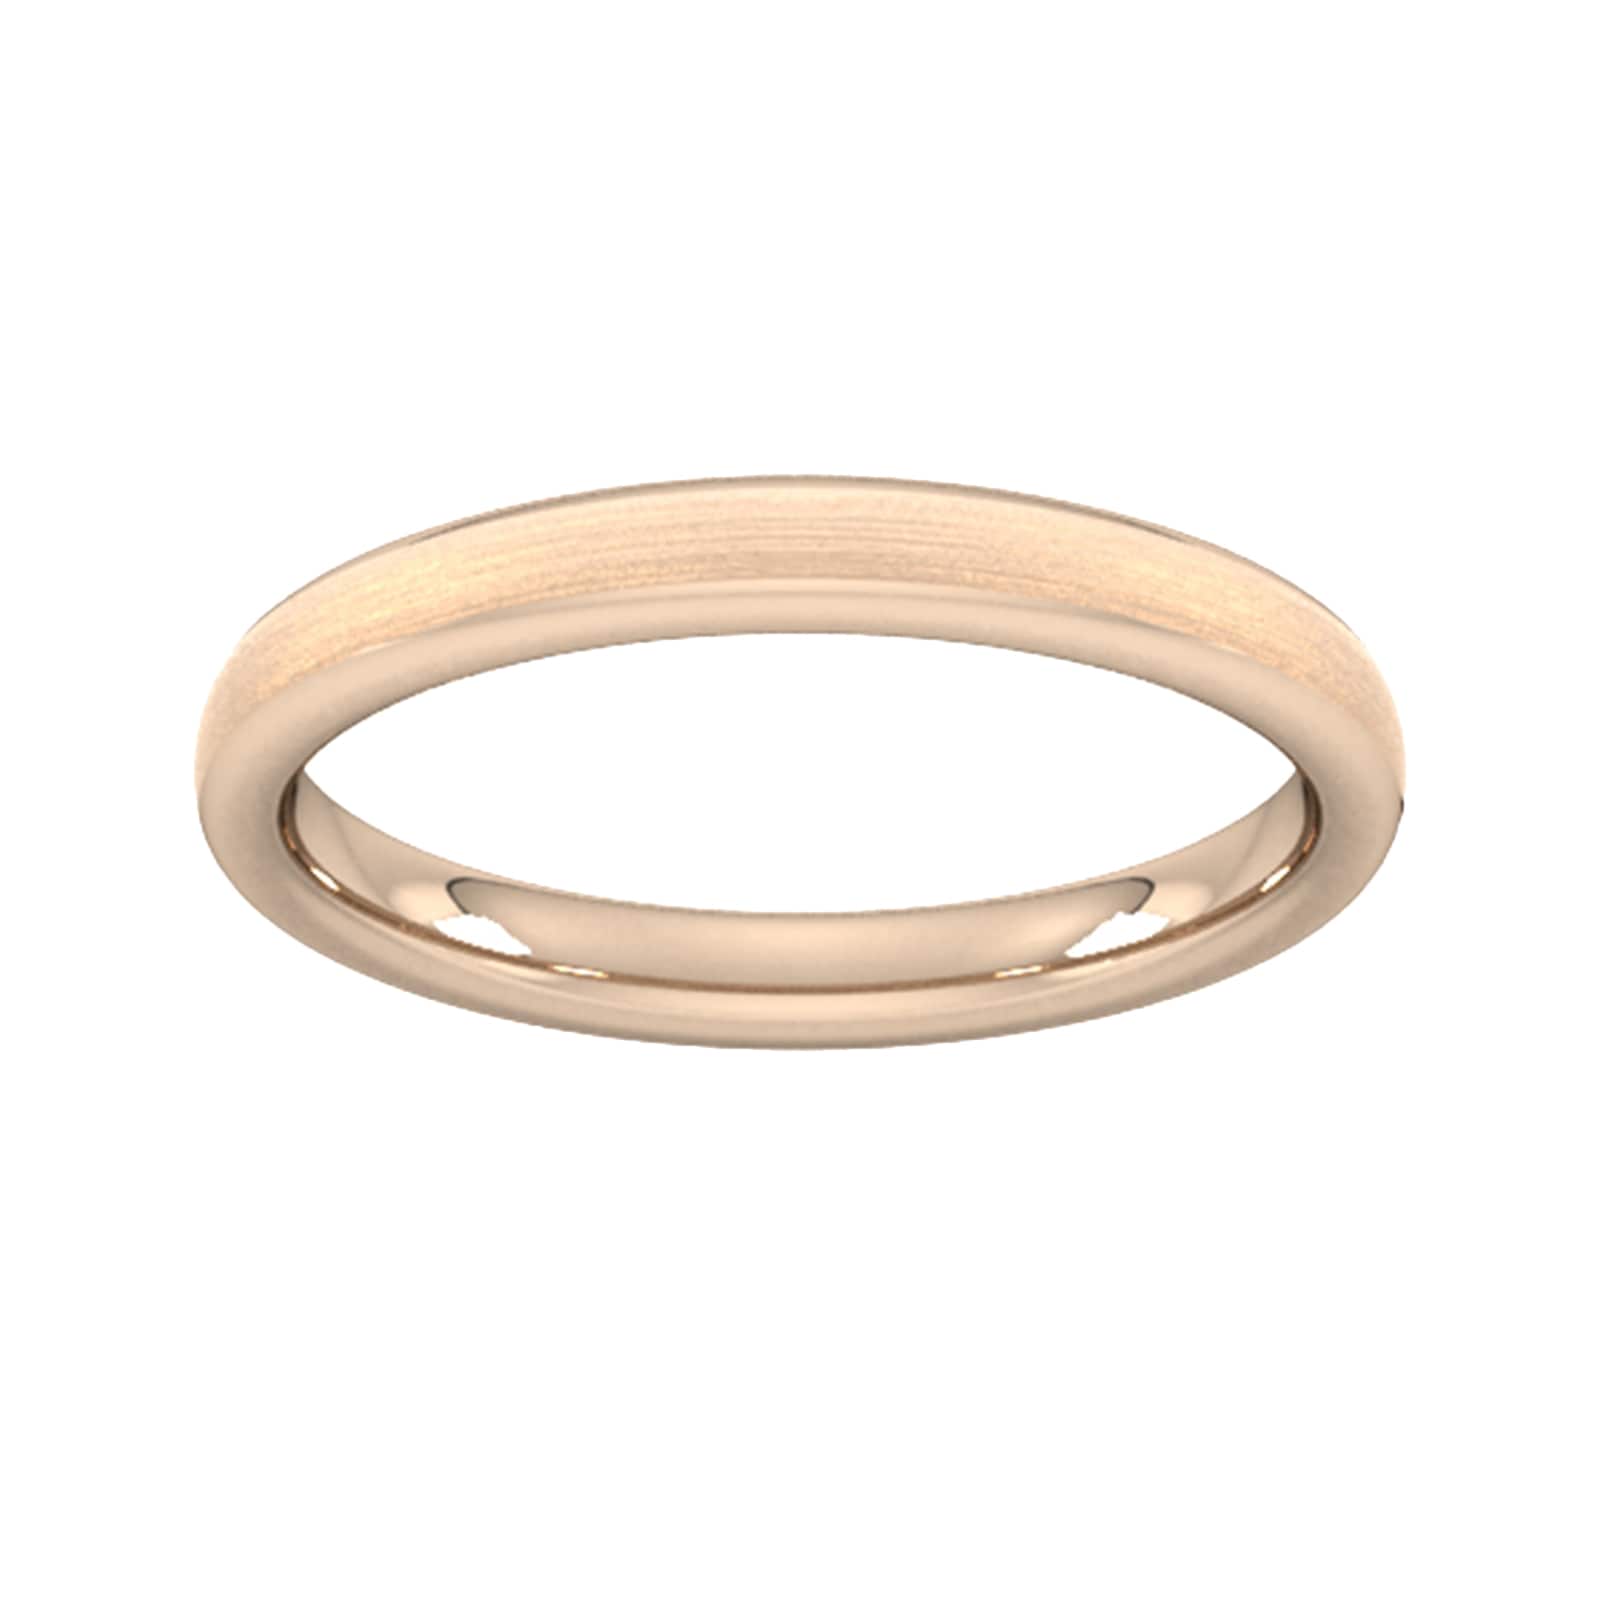 2.5mm Traditional Court Heavy Matt Finished Wedding Ring In 18 Carat Rose Gold - Ring Size R